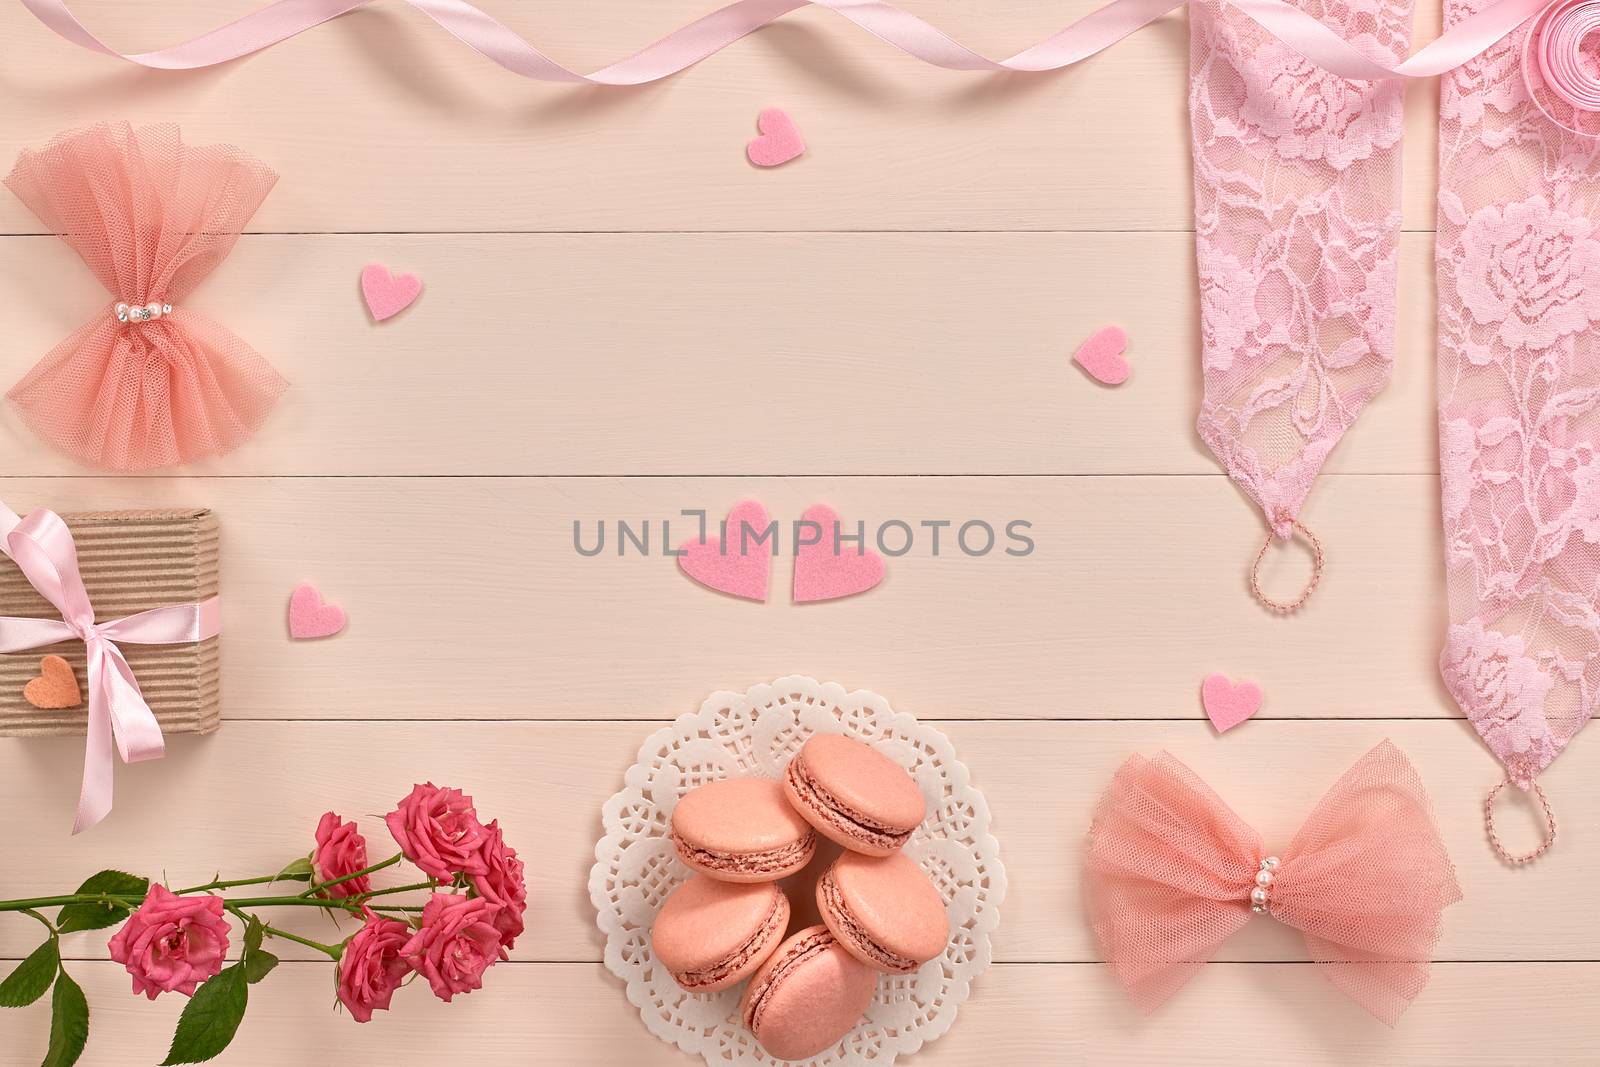 Overhead woman essentials fashion wedding accessories set. Lace gloves, macarons, gift box, hearts love and roses. Creative bride set, vanilla wooden background. Romantic modern, still life. Top view